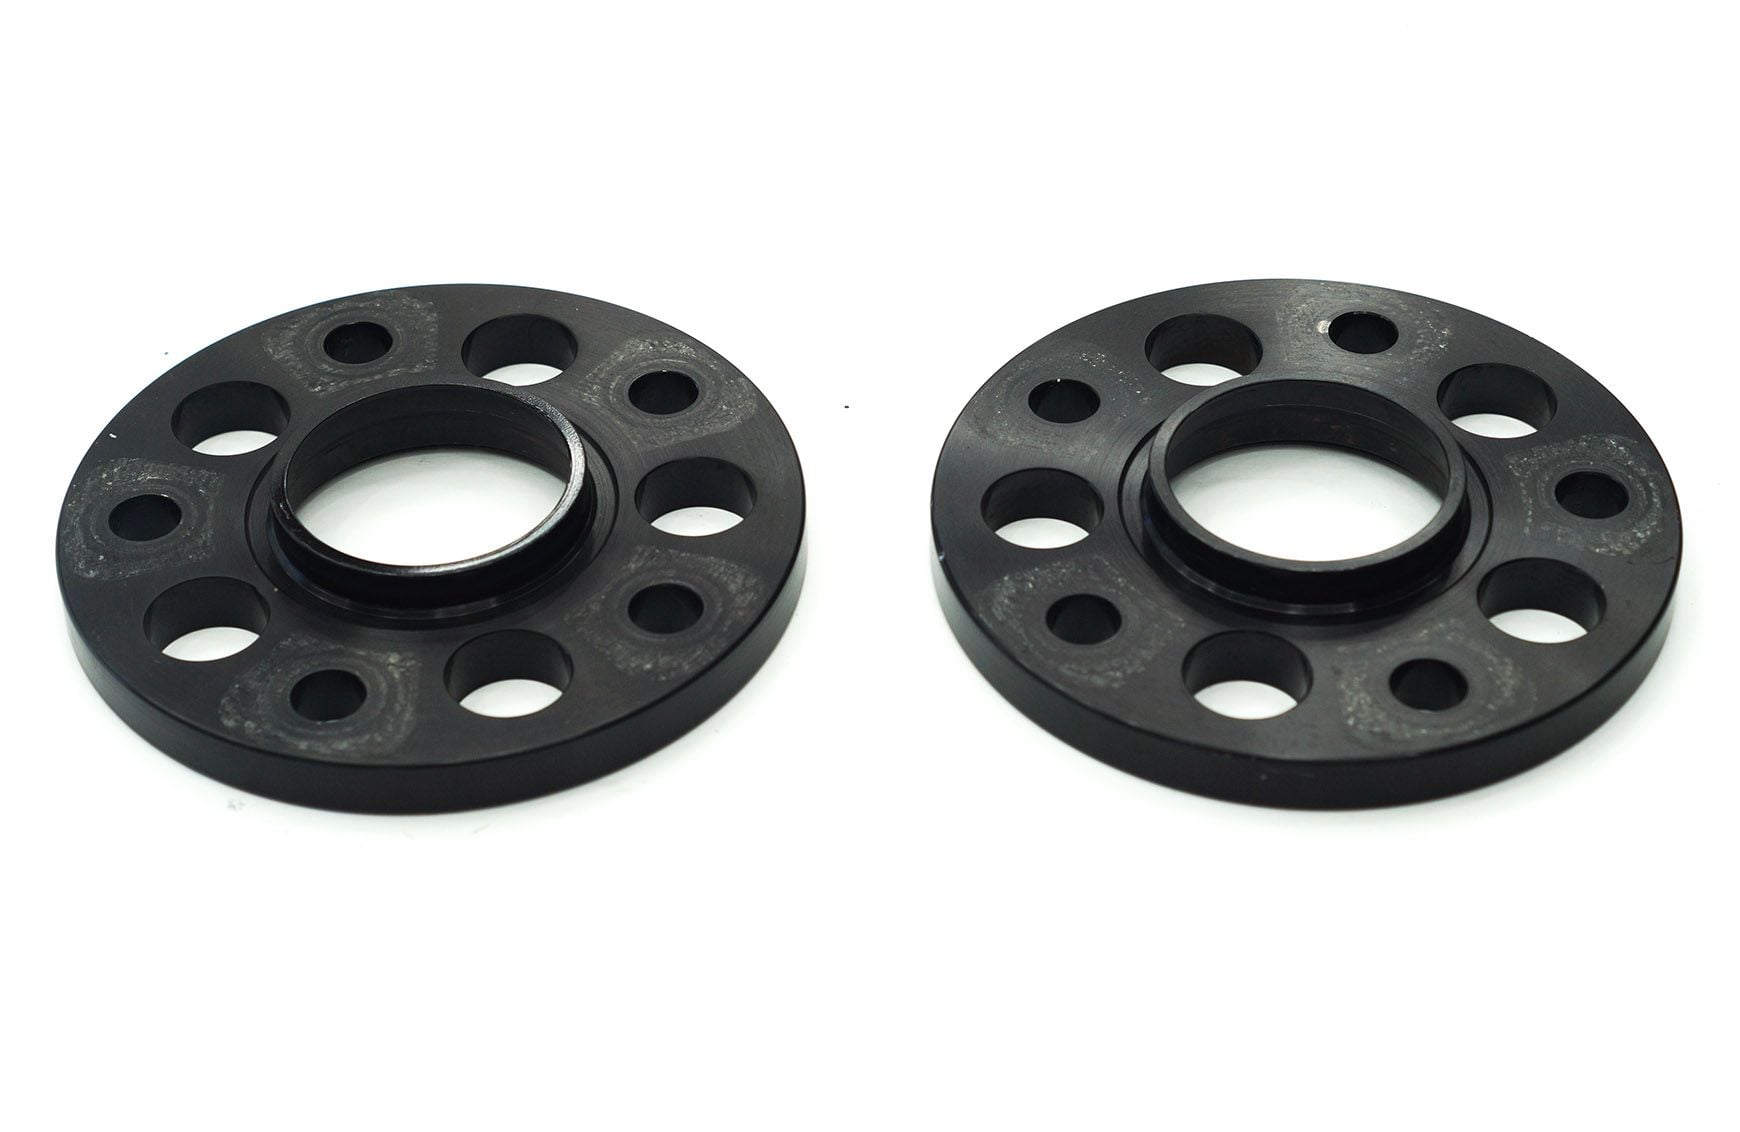 2006 Porsche 911 - 15MM Black Hub Centric Wheel Spacers  - Wheels and Tires/Axles - $80 - Bayport, NY 11705, United States